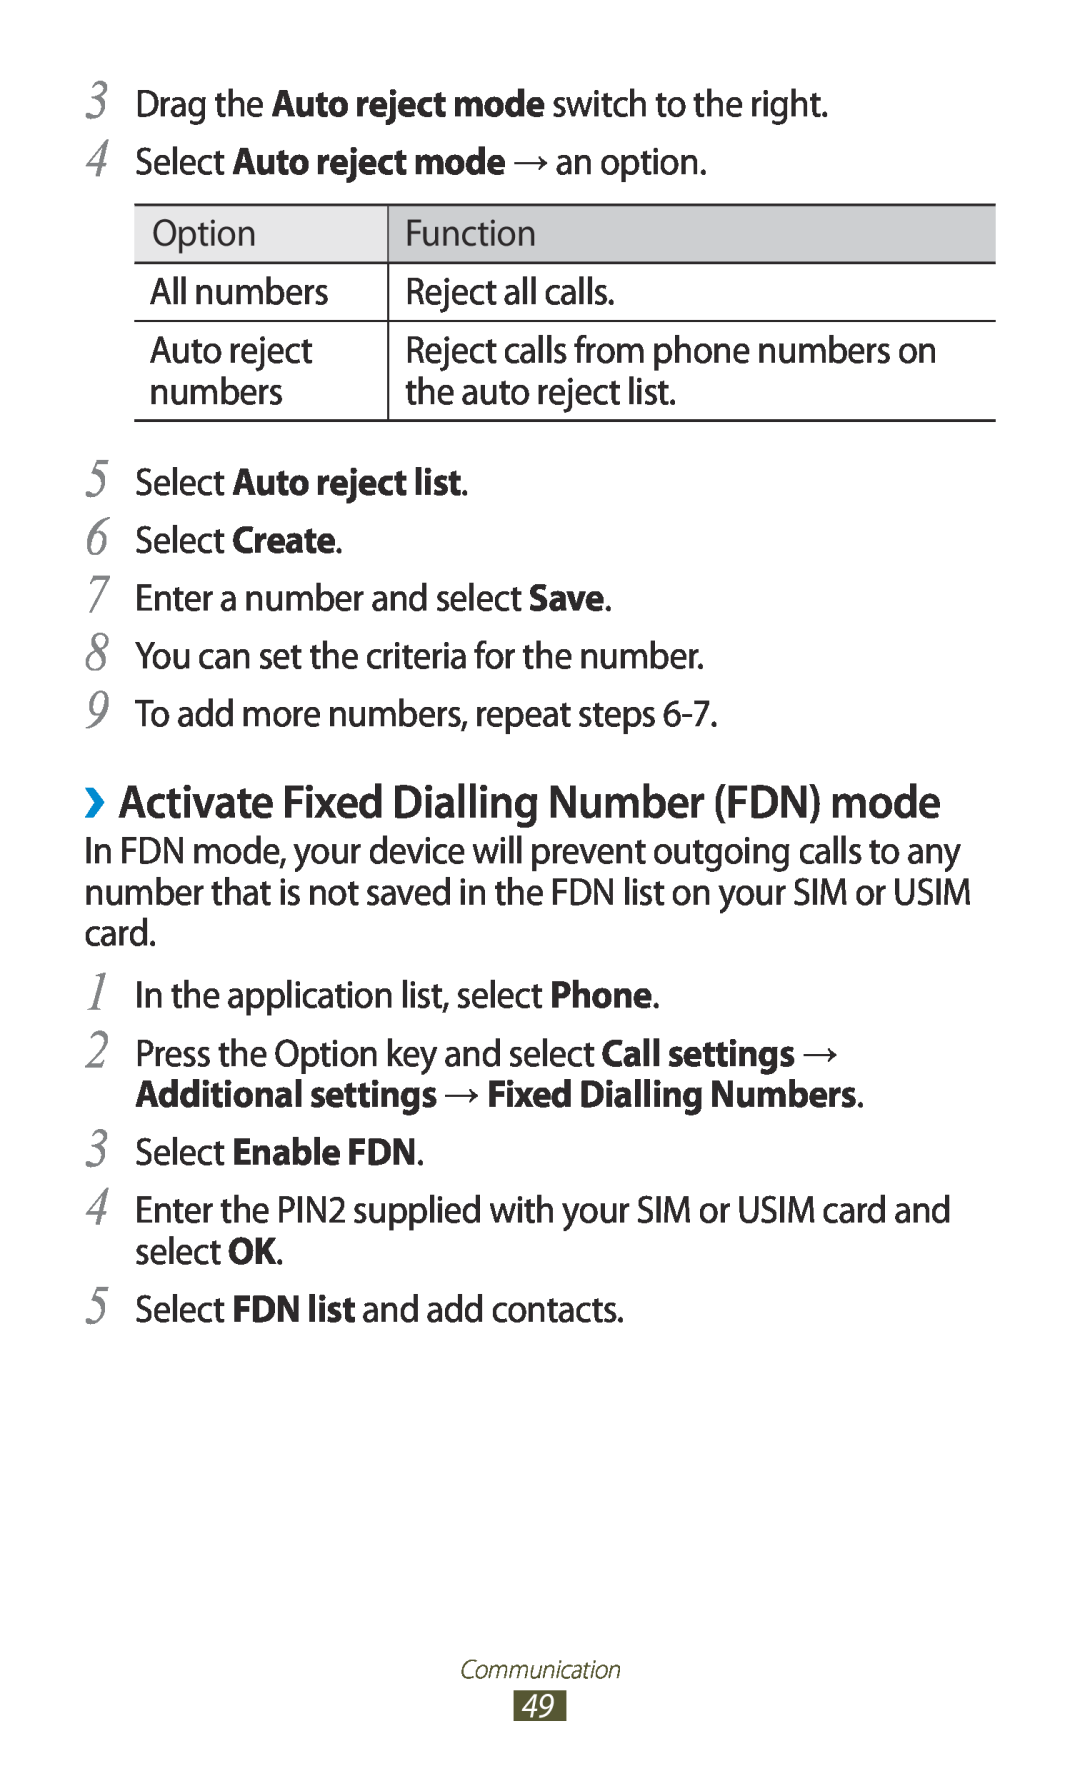 Samsung GT2S7560ZKAETL manual ››Activate Fixed Dialling Number FDN mode, Select Auto reject list, Select Enable FDN 